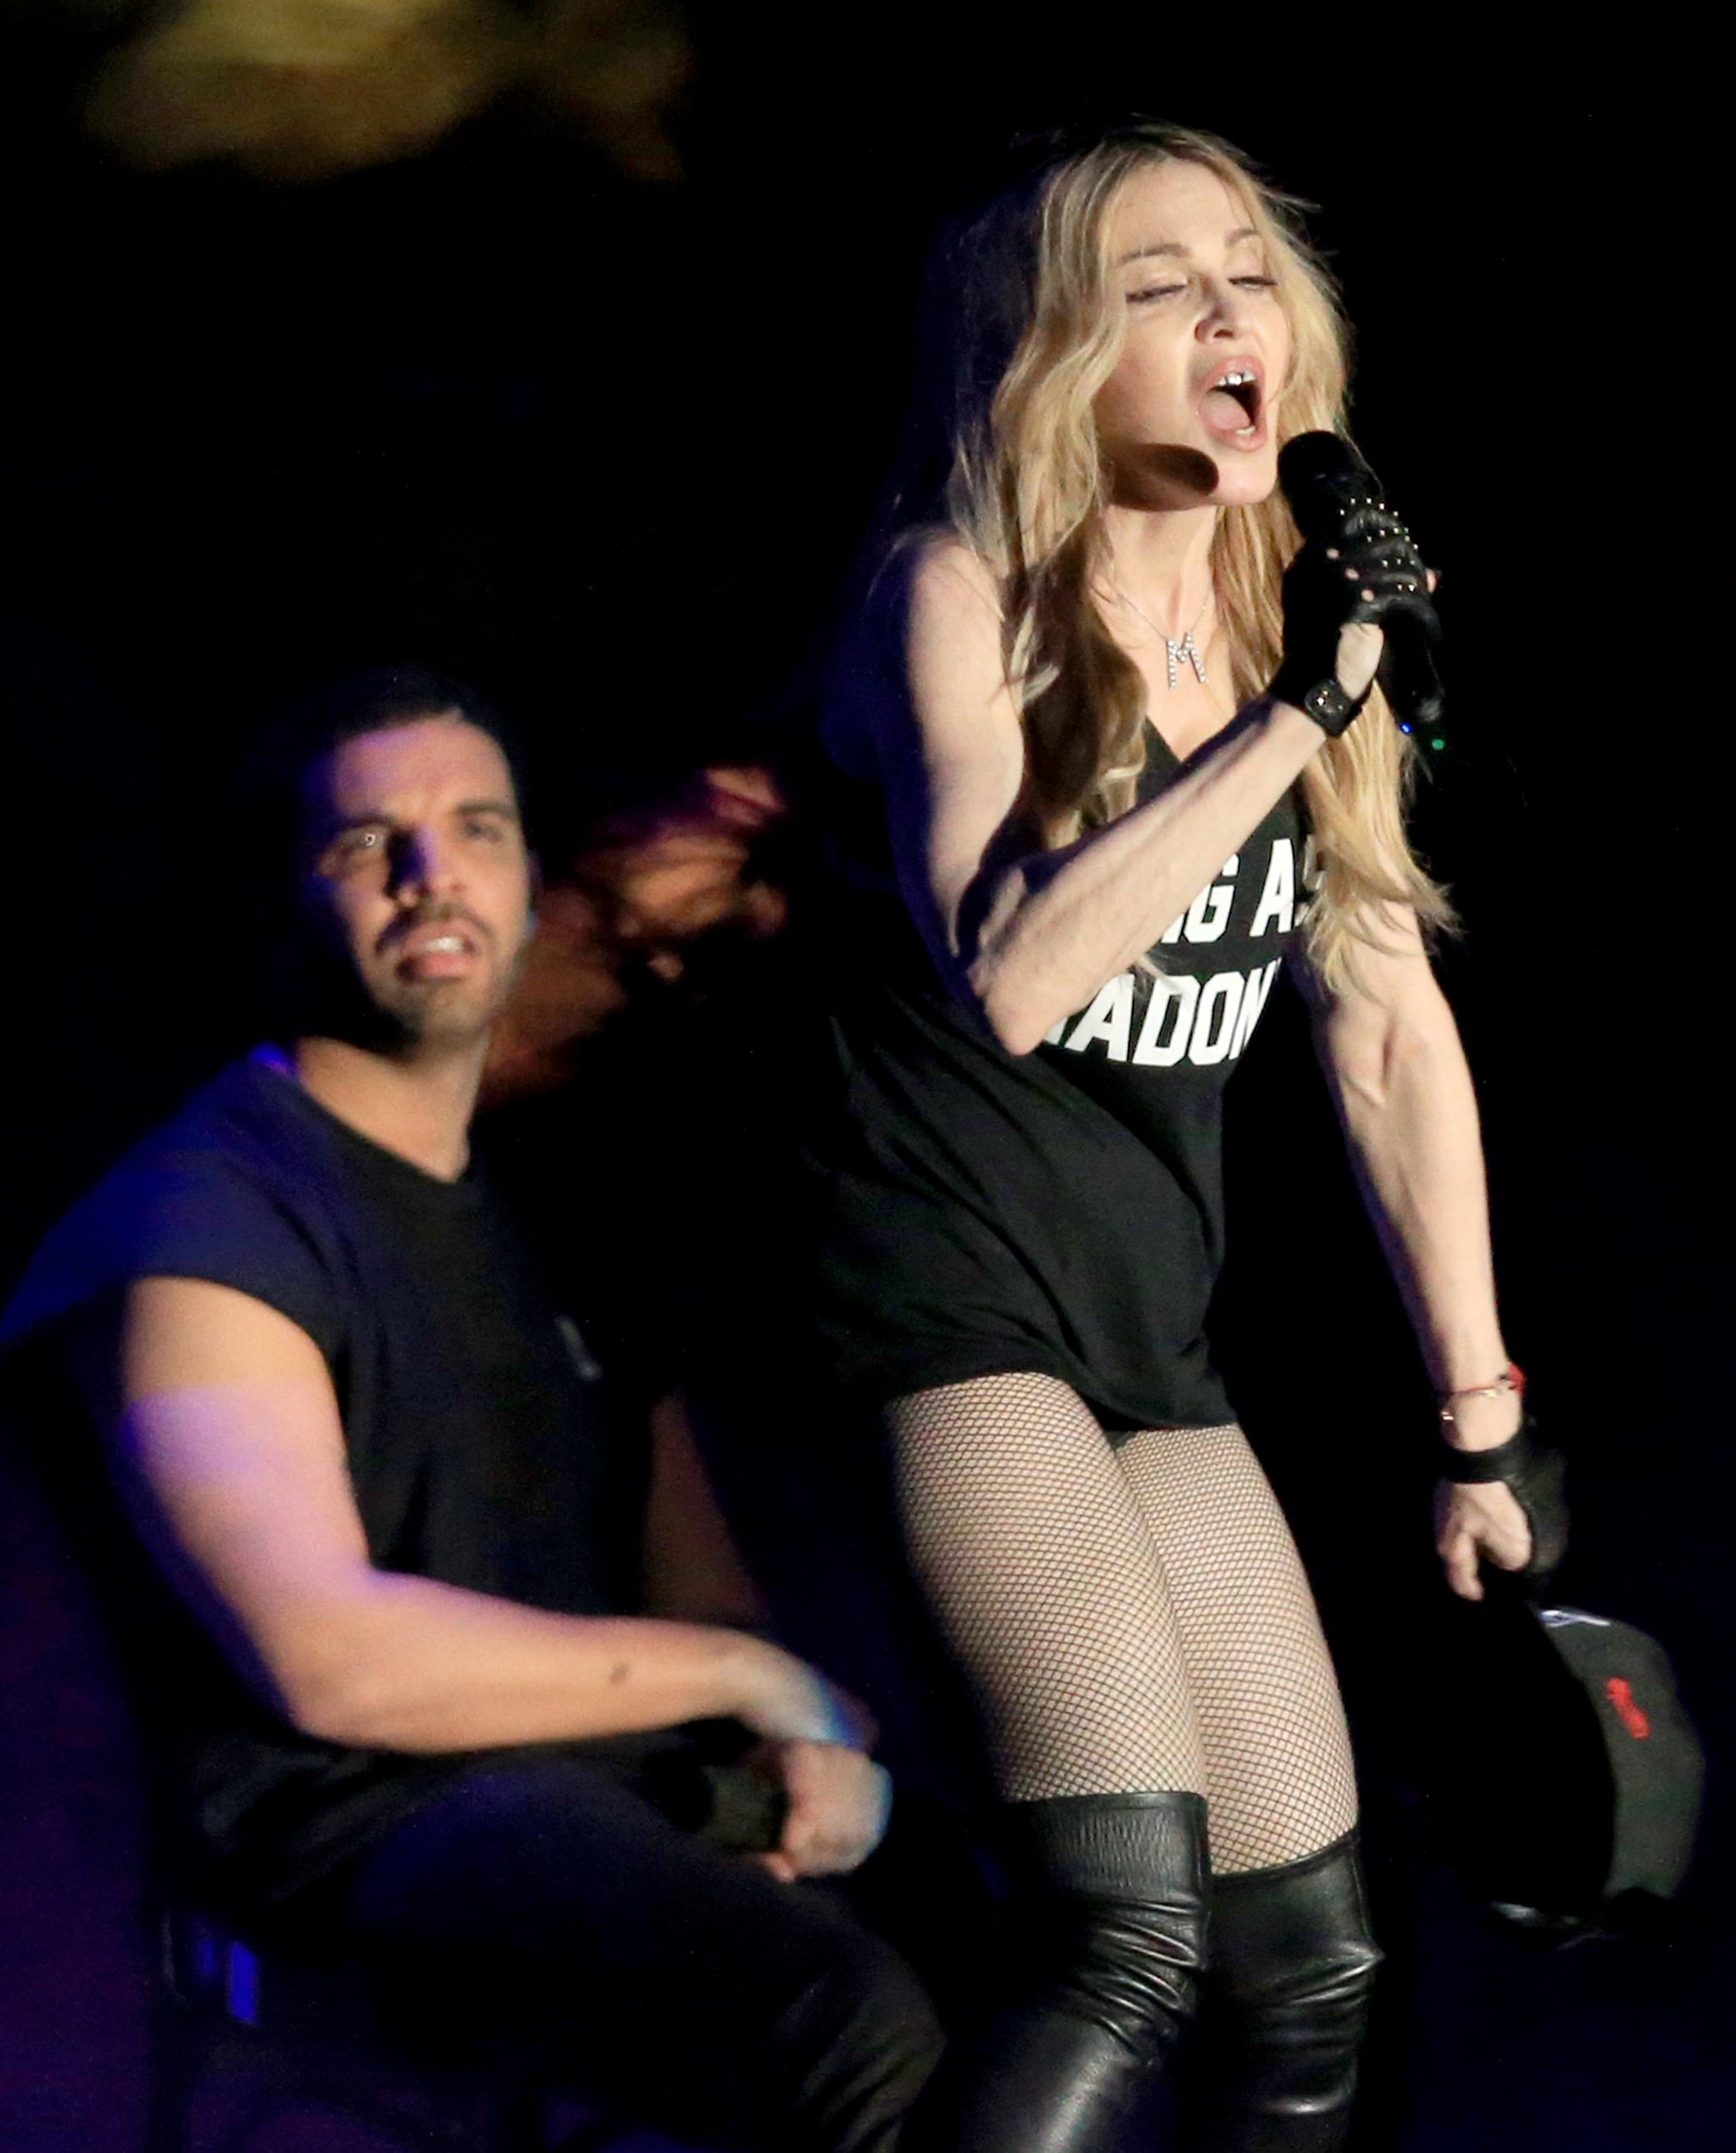 Madonna And Drake 22 Pop Culture Costumes You Re Going To See Everywhere This Year Popsugar Celebrity Photo 23